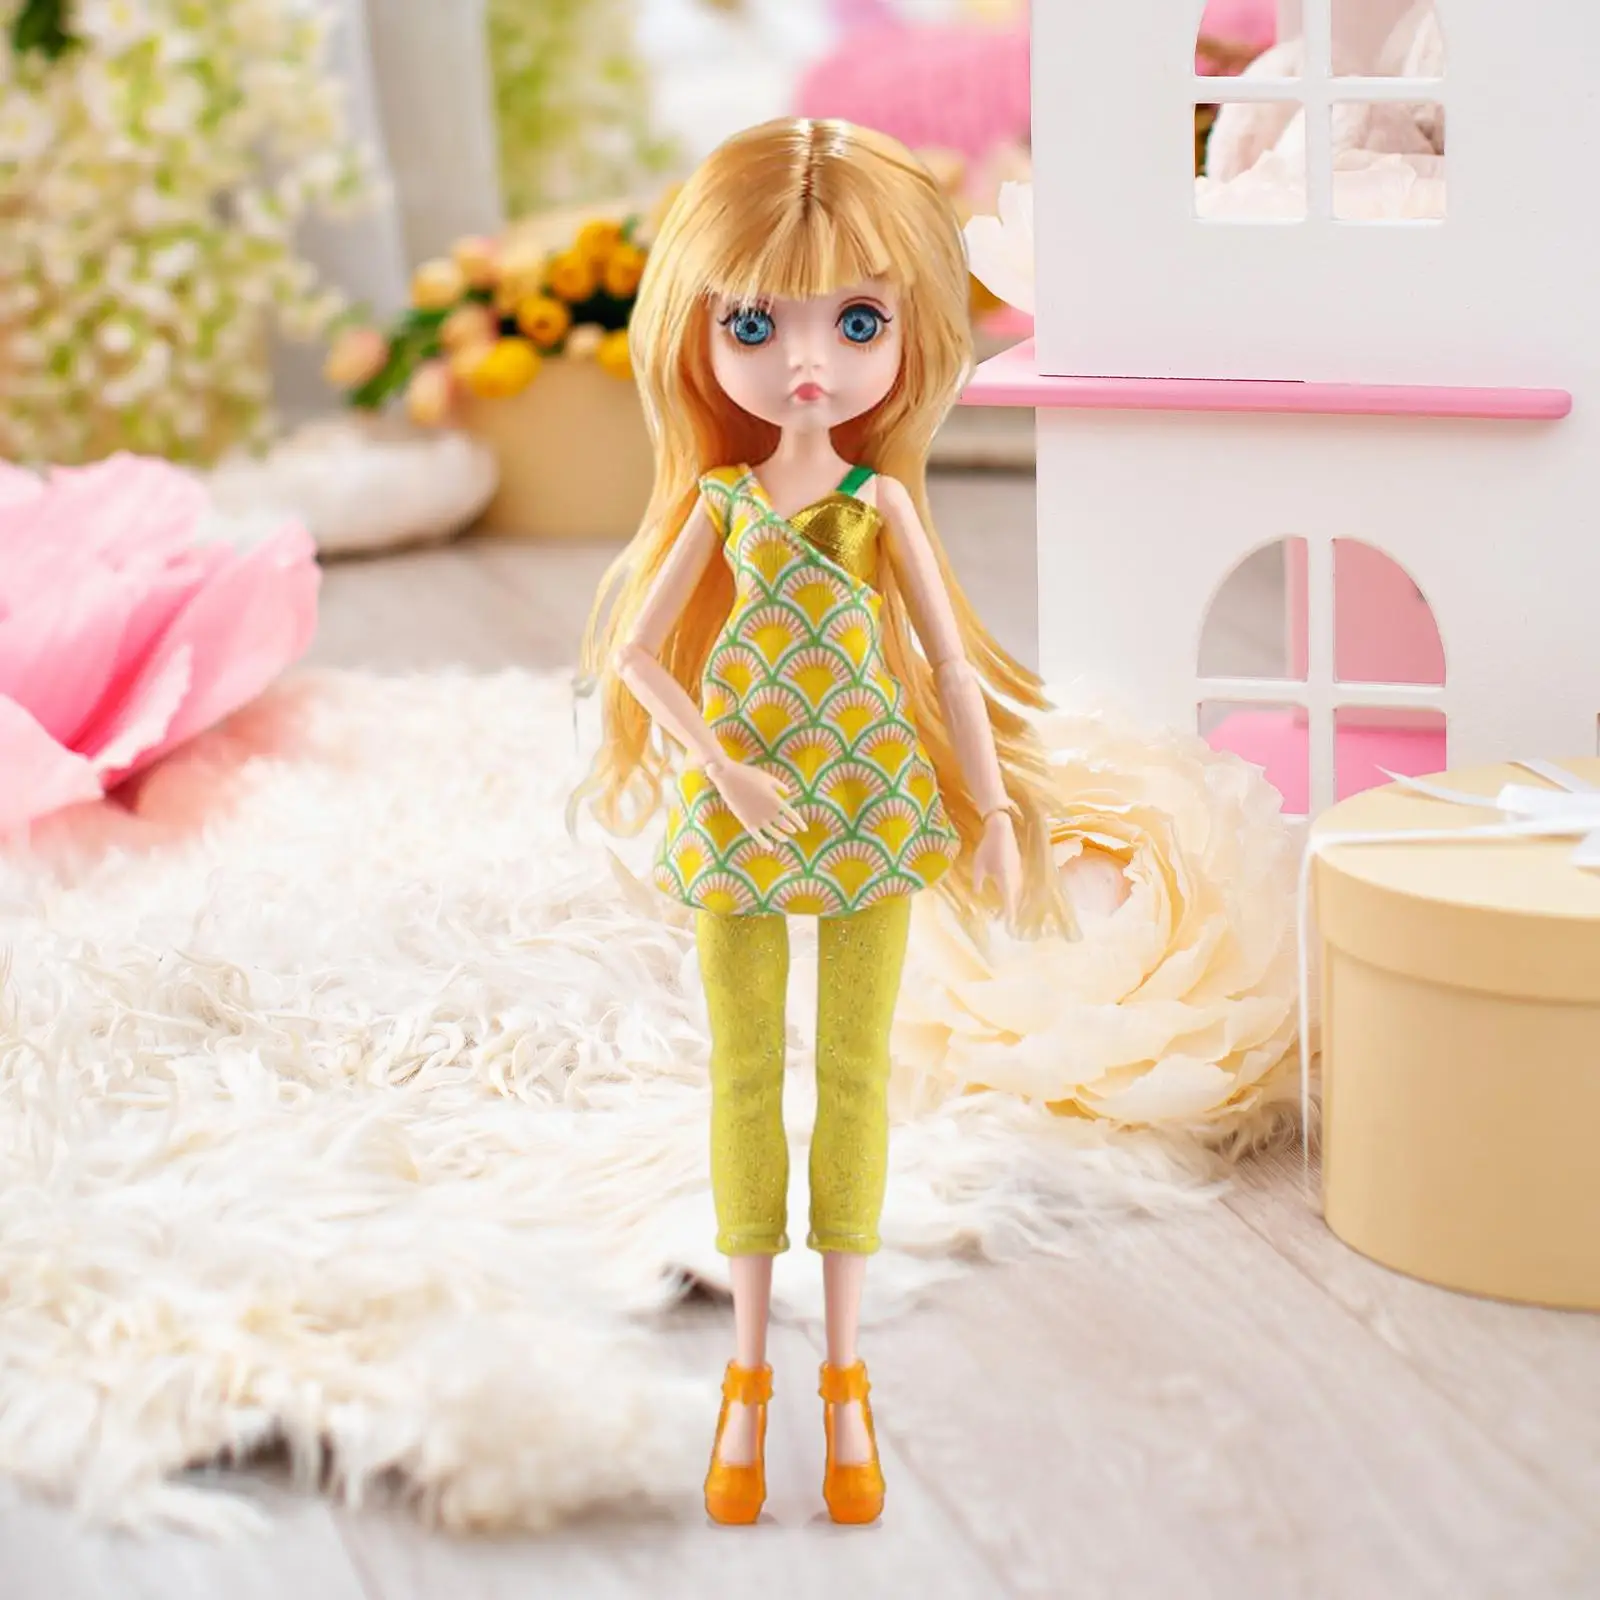 1/6 Fashion Doll with Shoes 9 Flexible Joints Makeup Moveable Joints Soft Hair Pretend Play Cute Toy for 3 4 5 Holiday Gifts